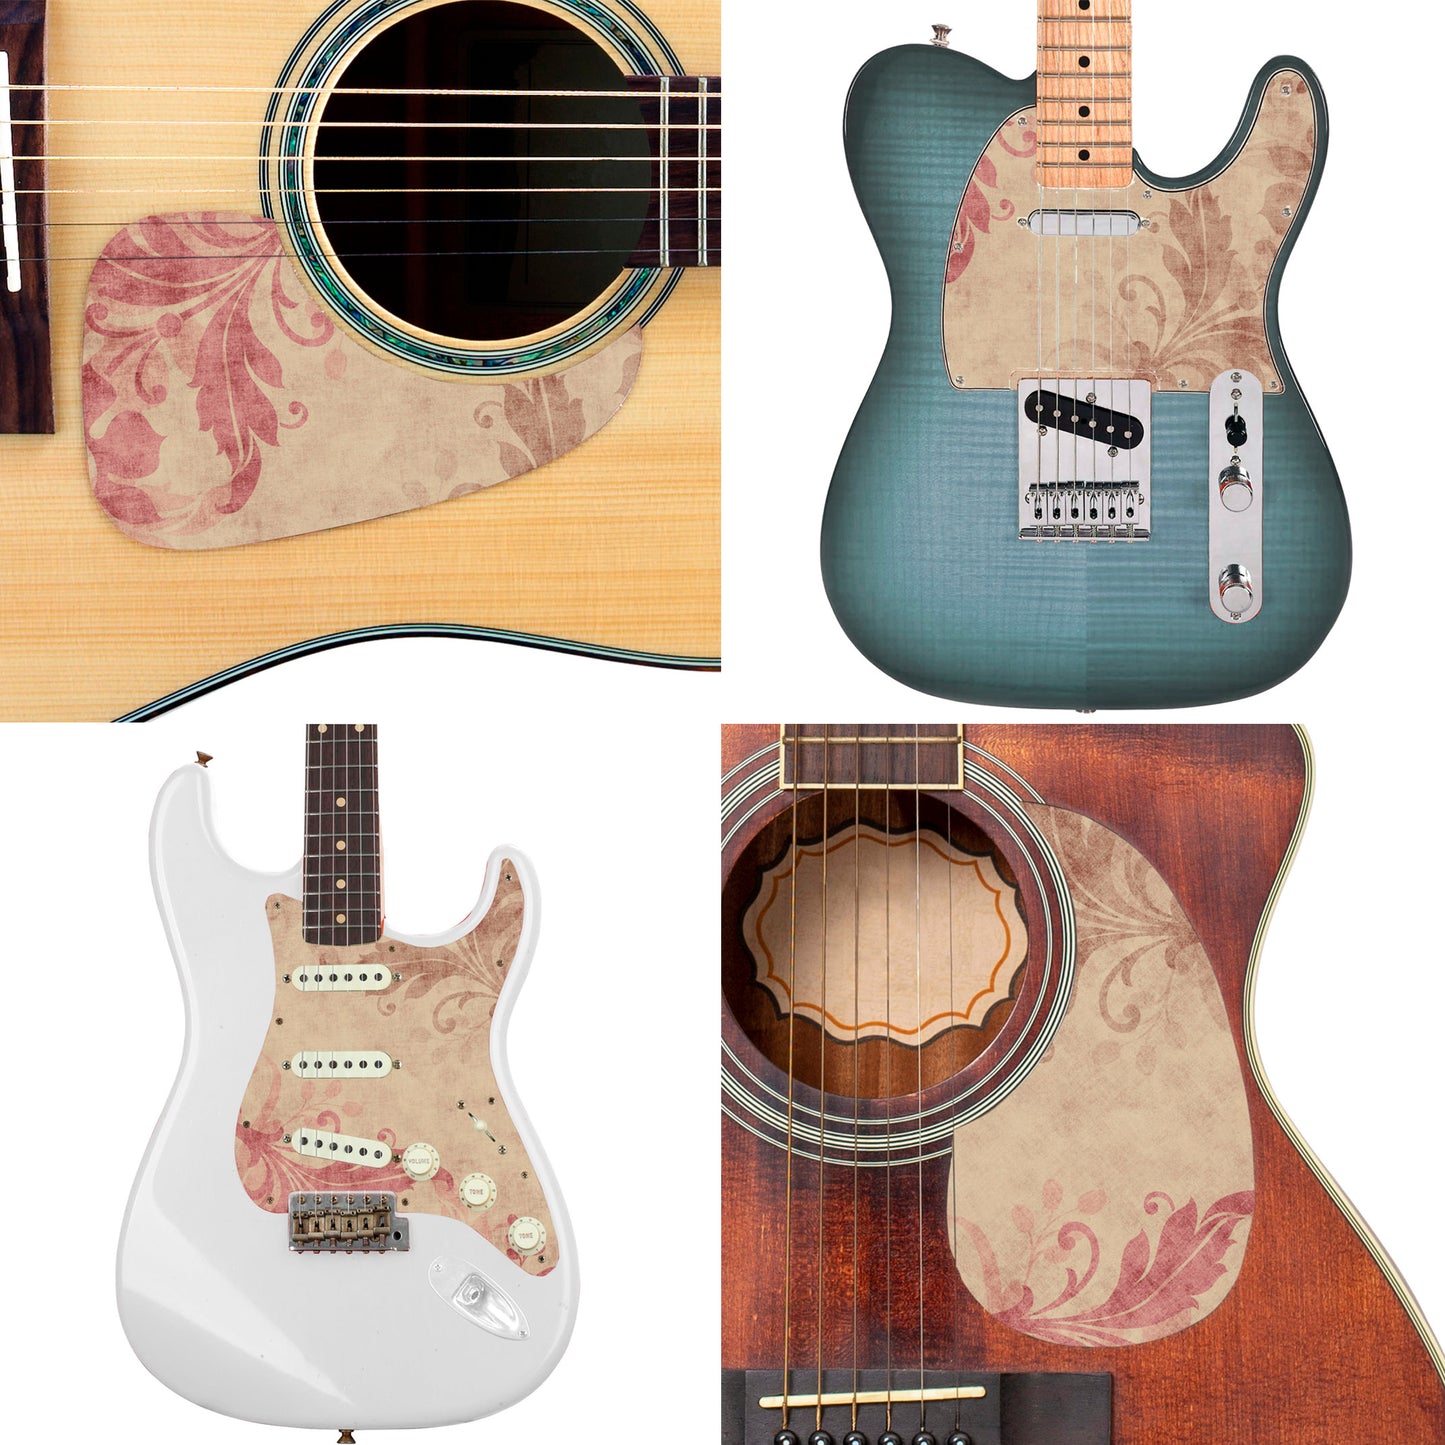 Guitar Custom PickGuard Sticker Skins. Customise your own existing Pickguard, Headstock, Tremolo Cover plate. The Quilted Patches PK02